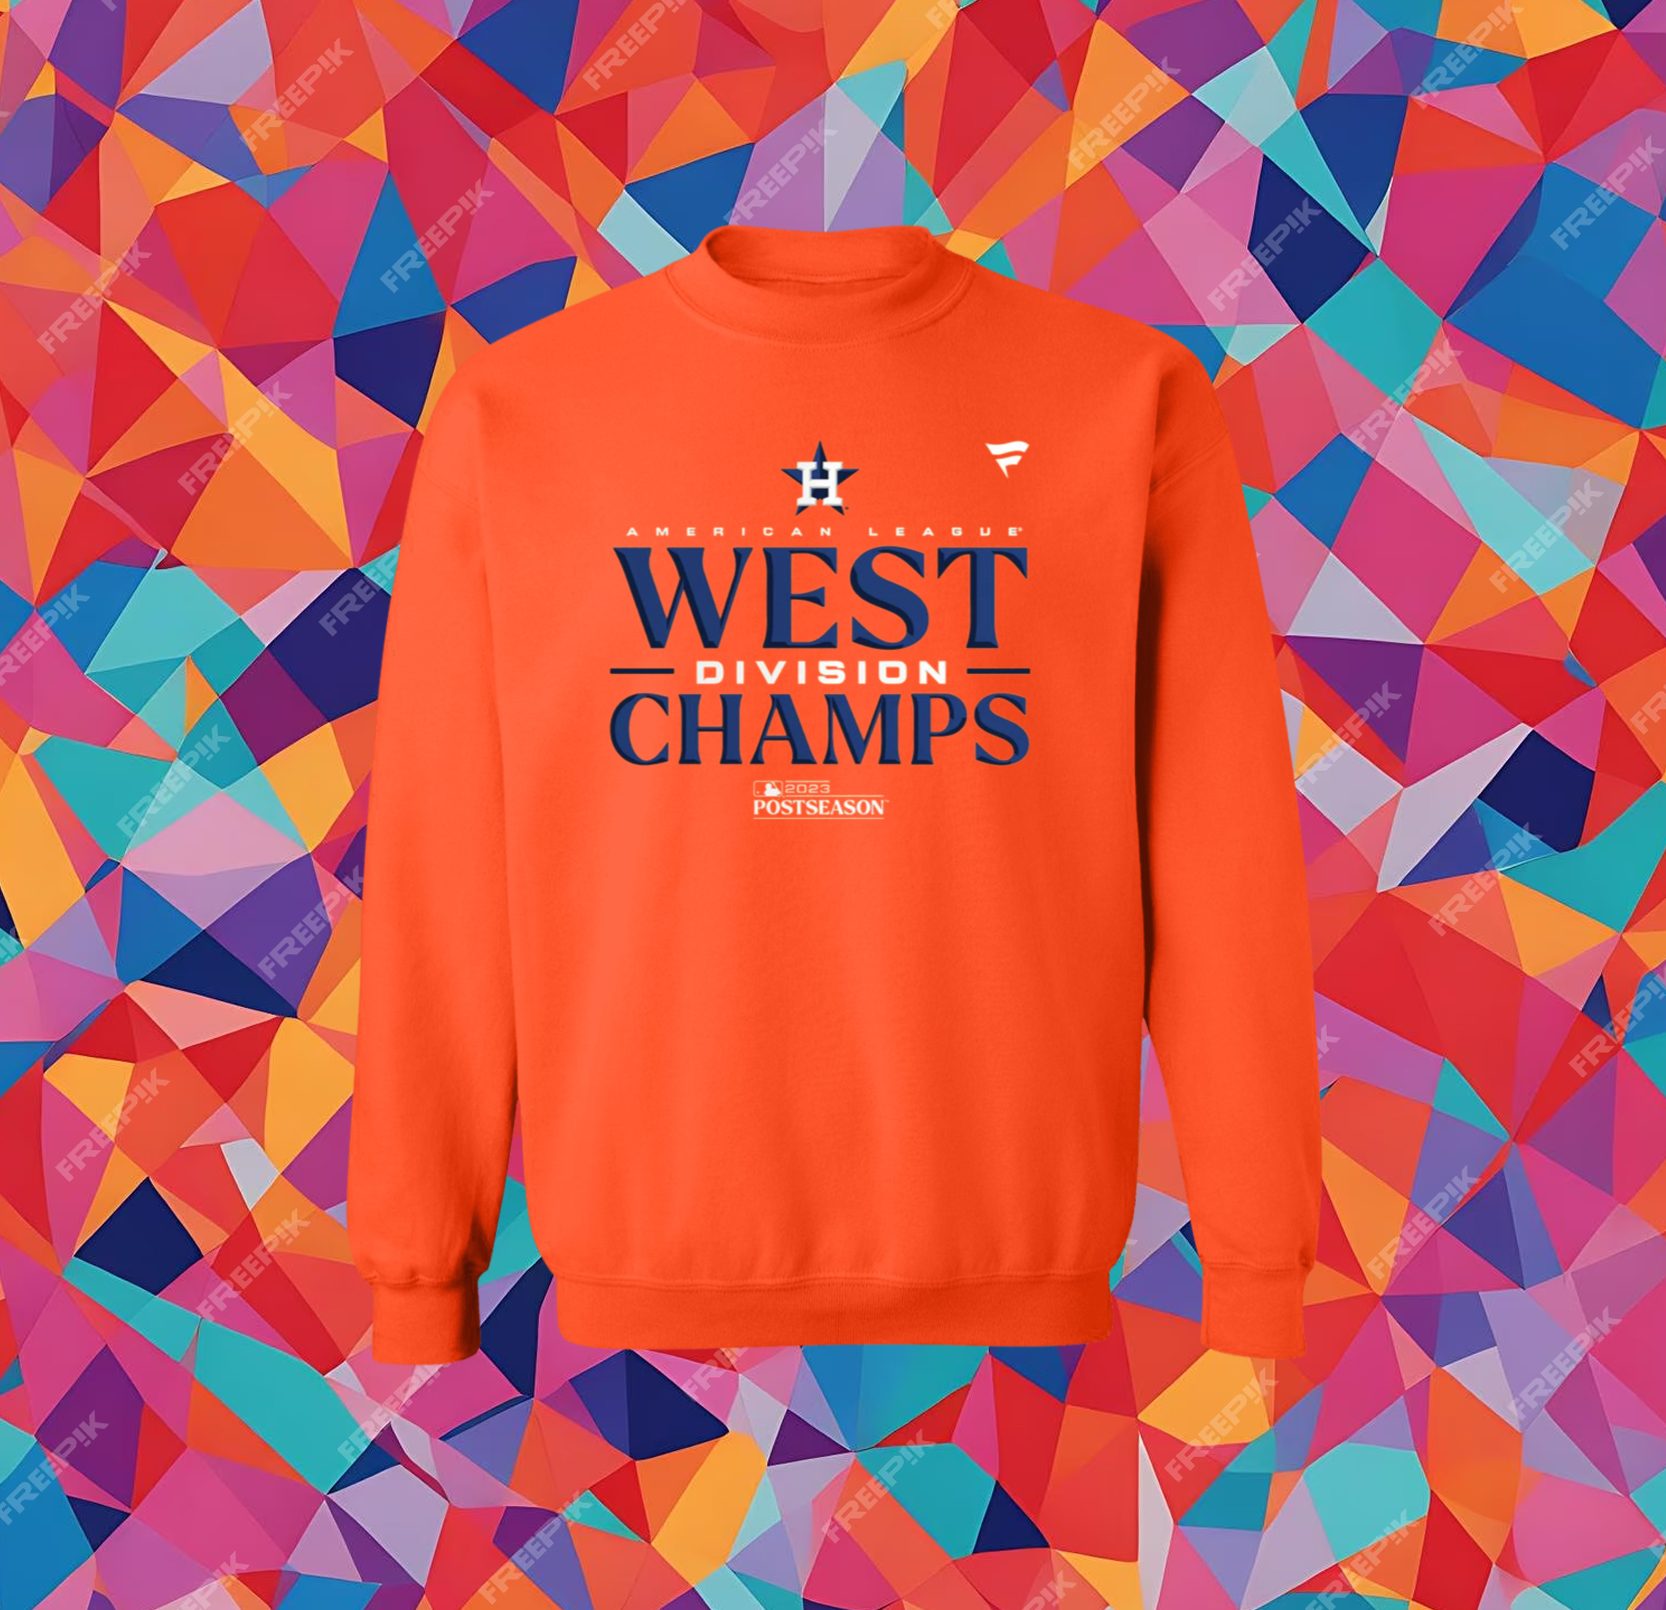 Official 2023 AL West Division Champions Houston Astros 2017 2023 Shirt,  hoodie, sweater, long sleeve and tank top